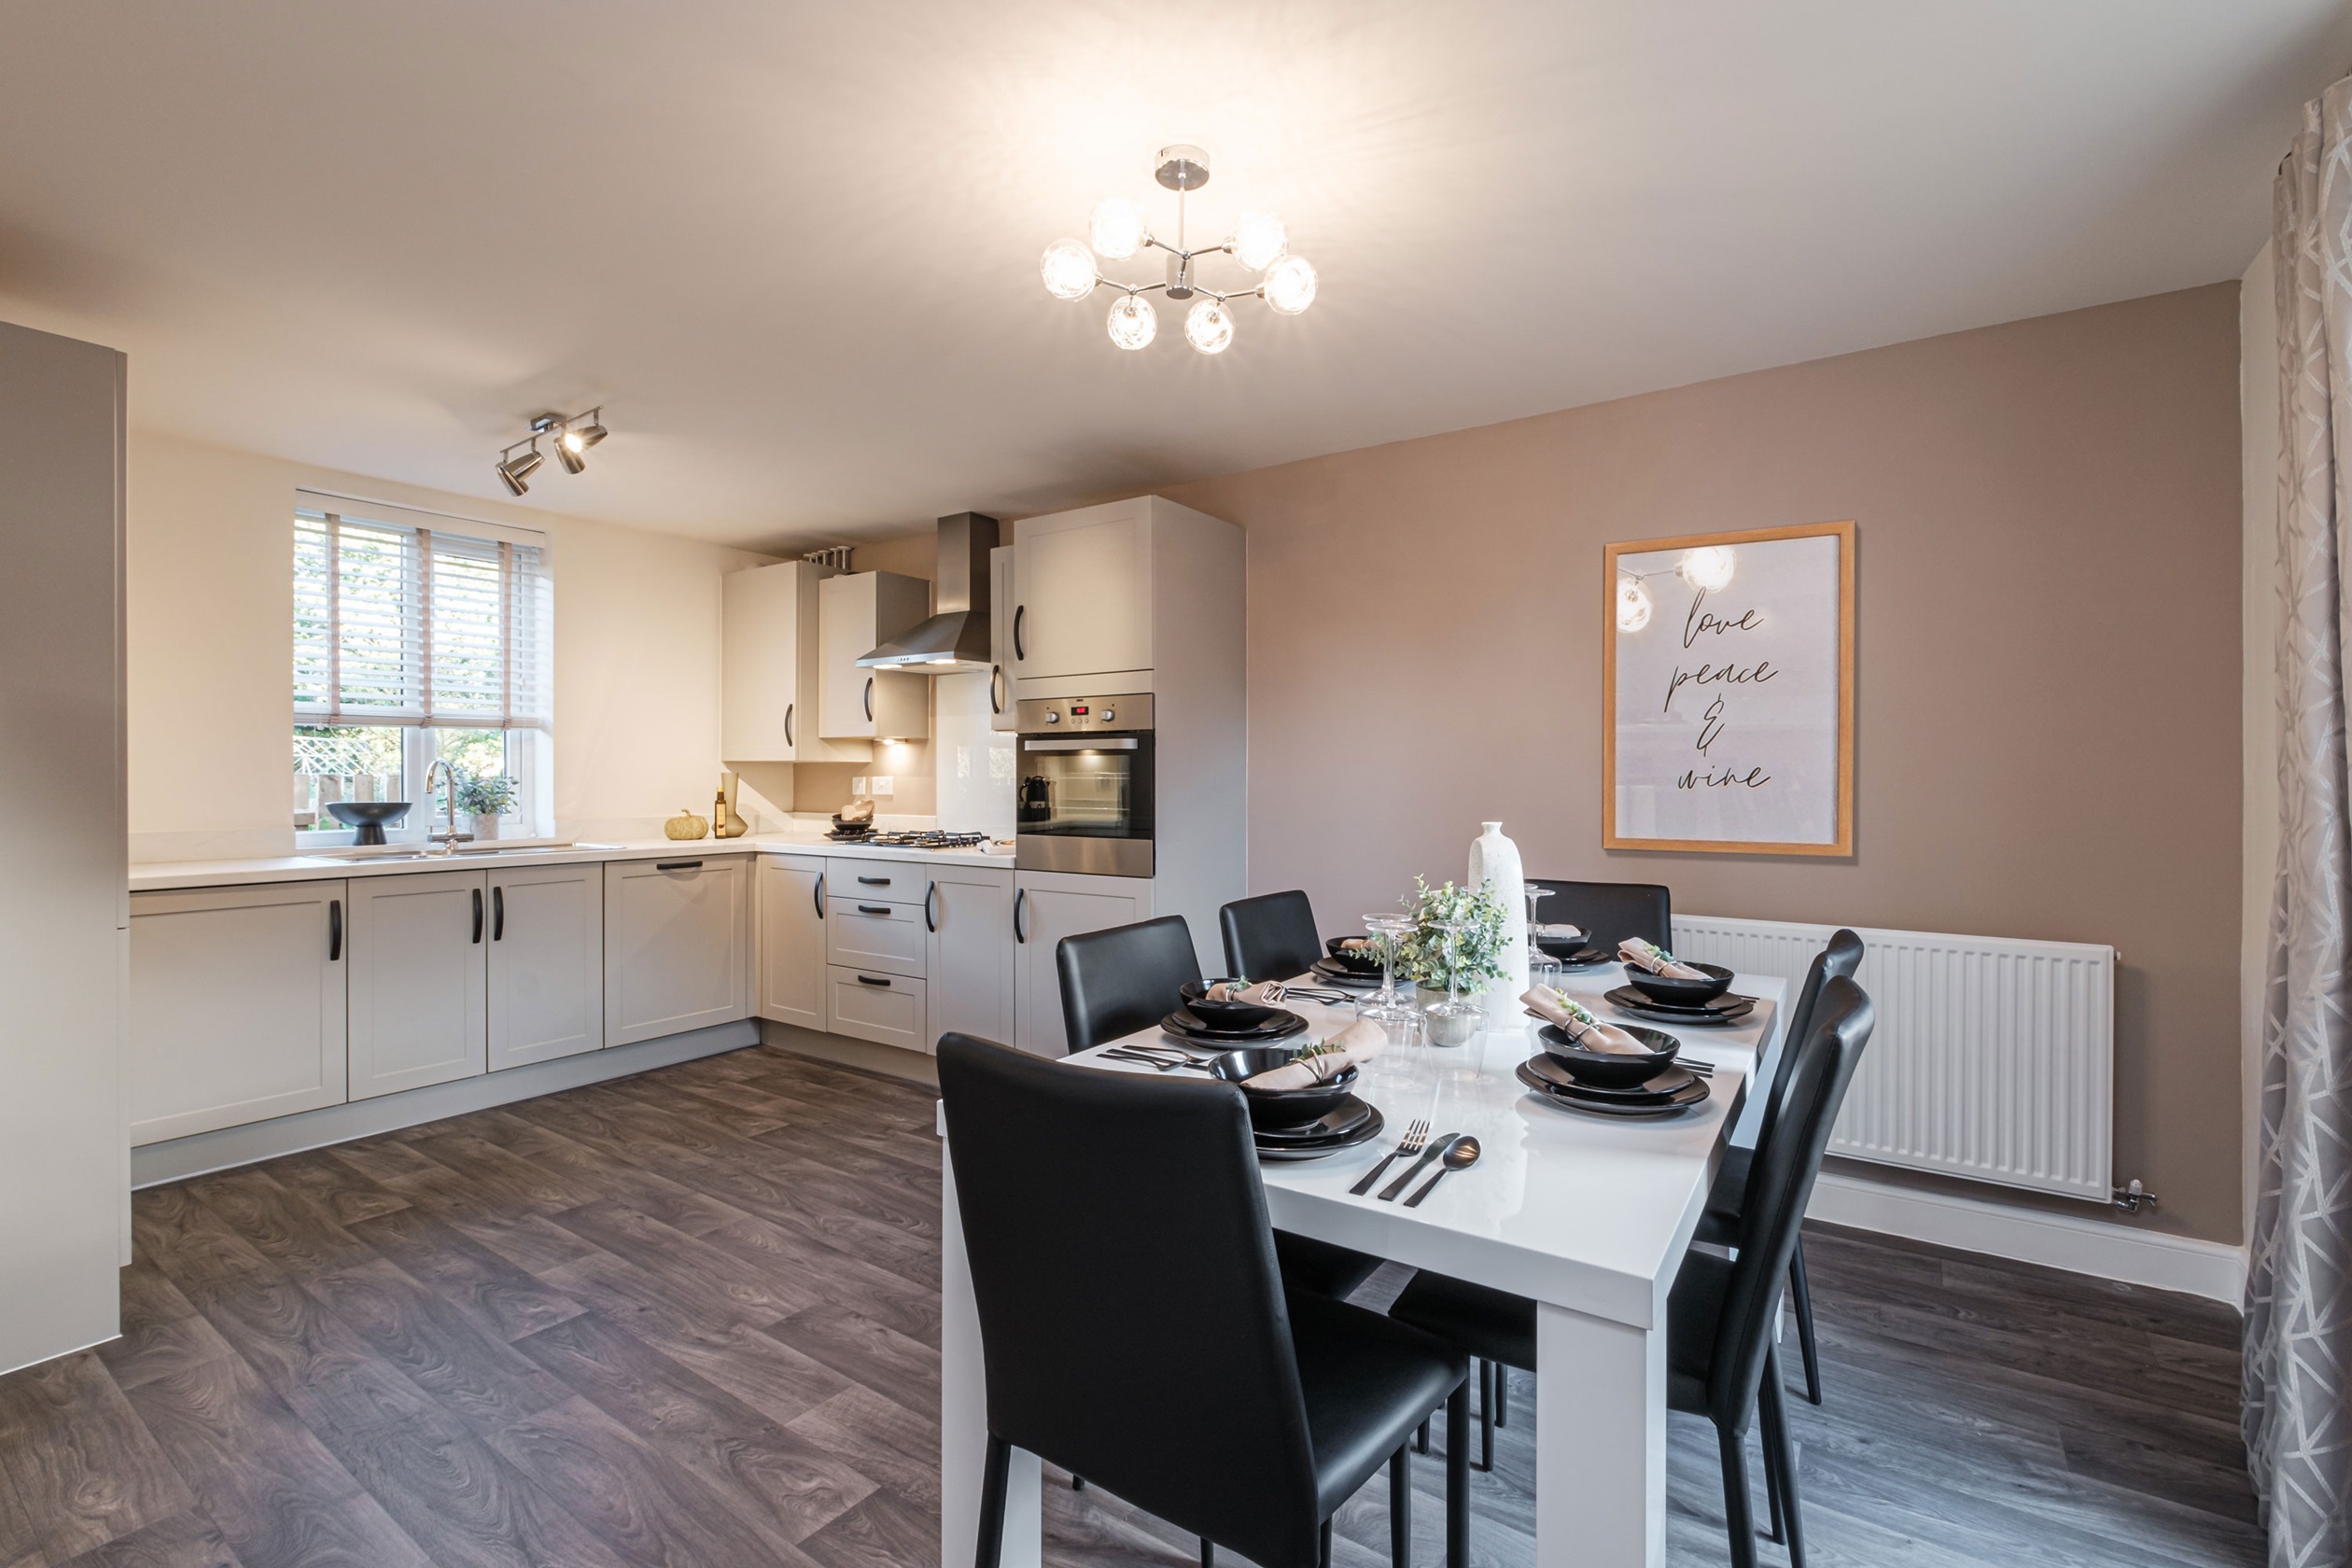 Property 3 of 9. Interior View Of Kitchen Diner In Our Lutterworth 3 Bedroom Home